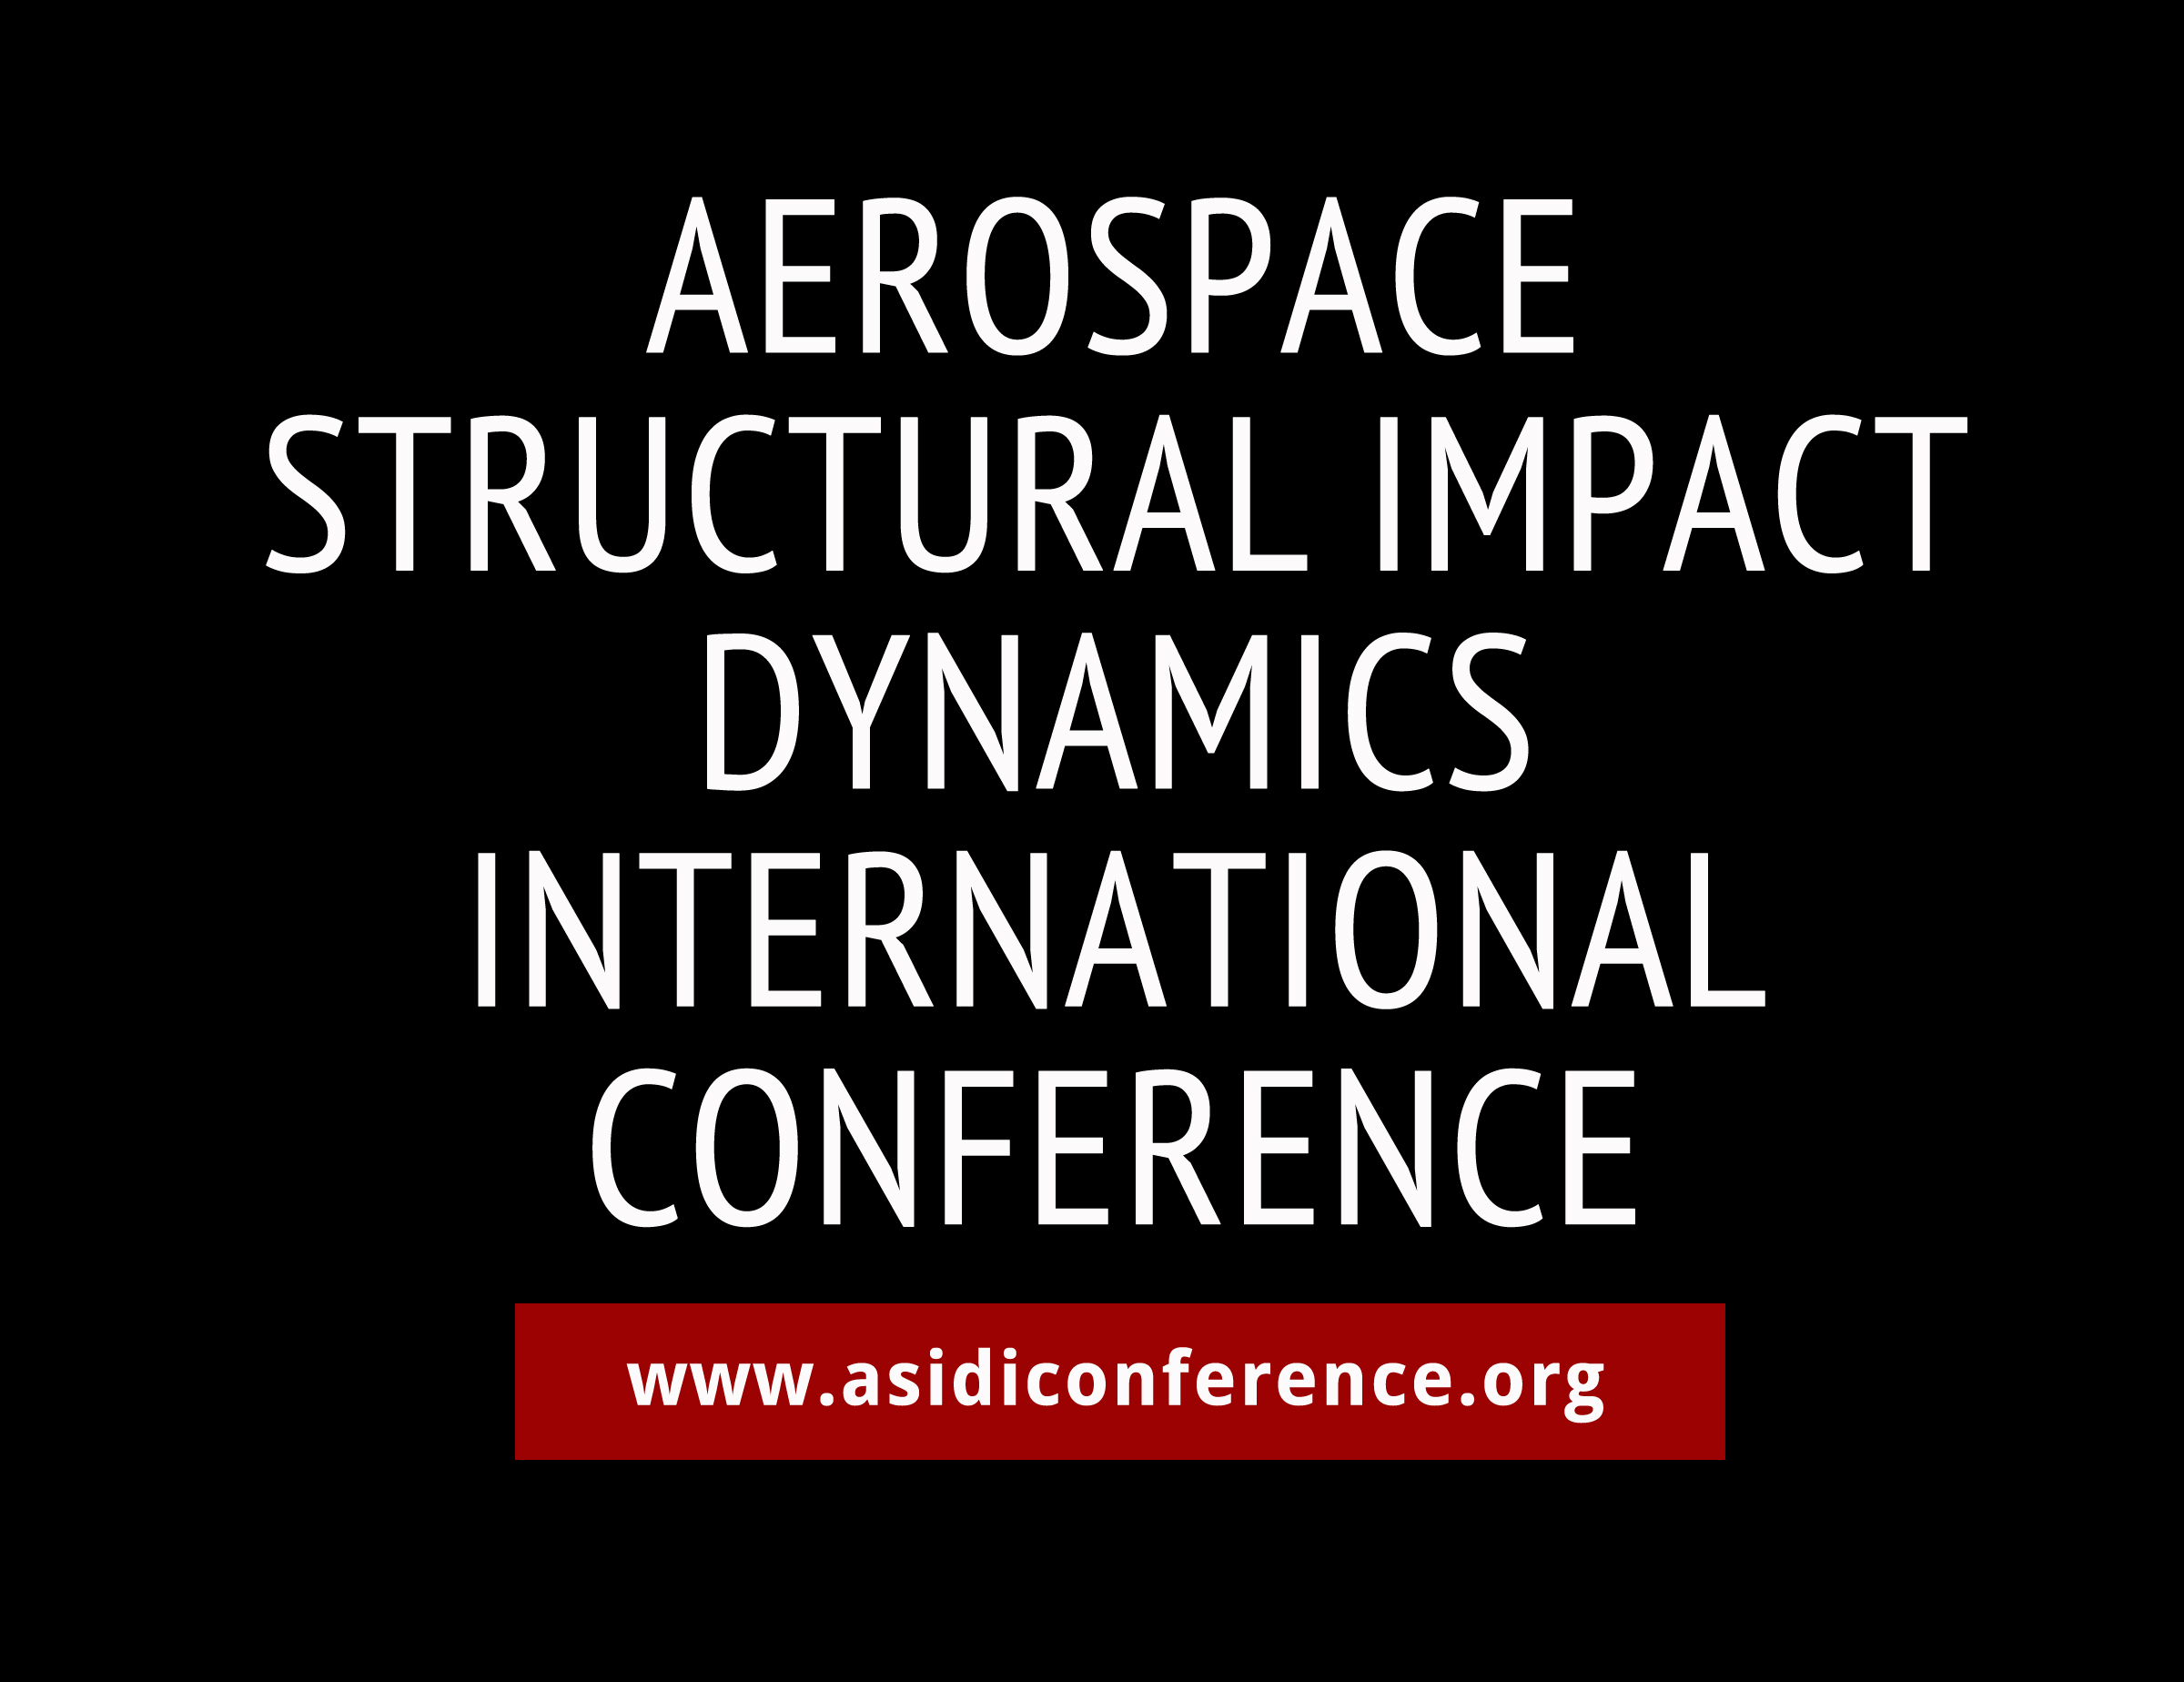 Aerospace Structural Impact Dynamics International Conference